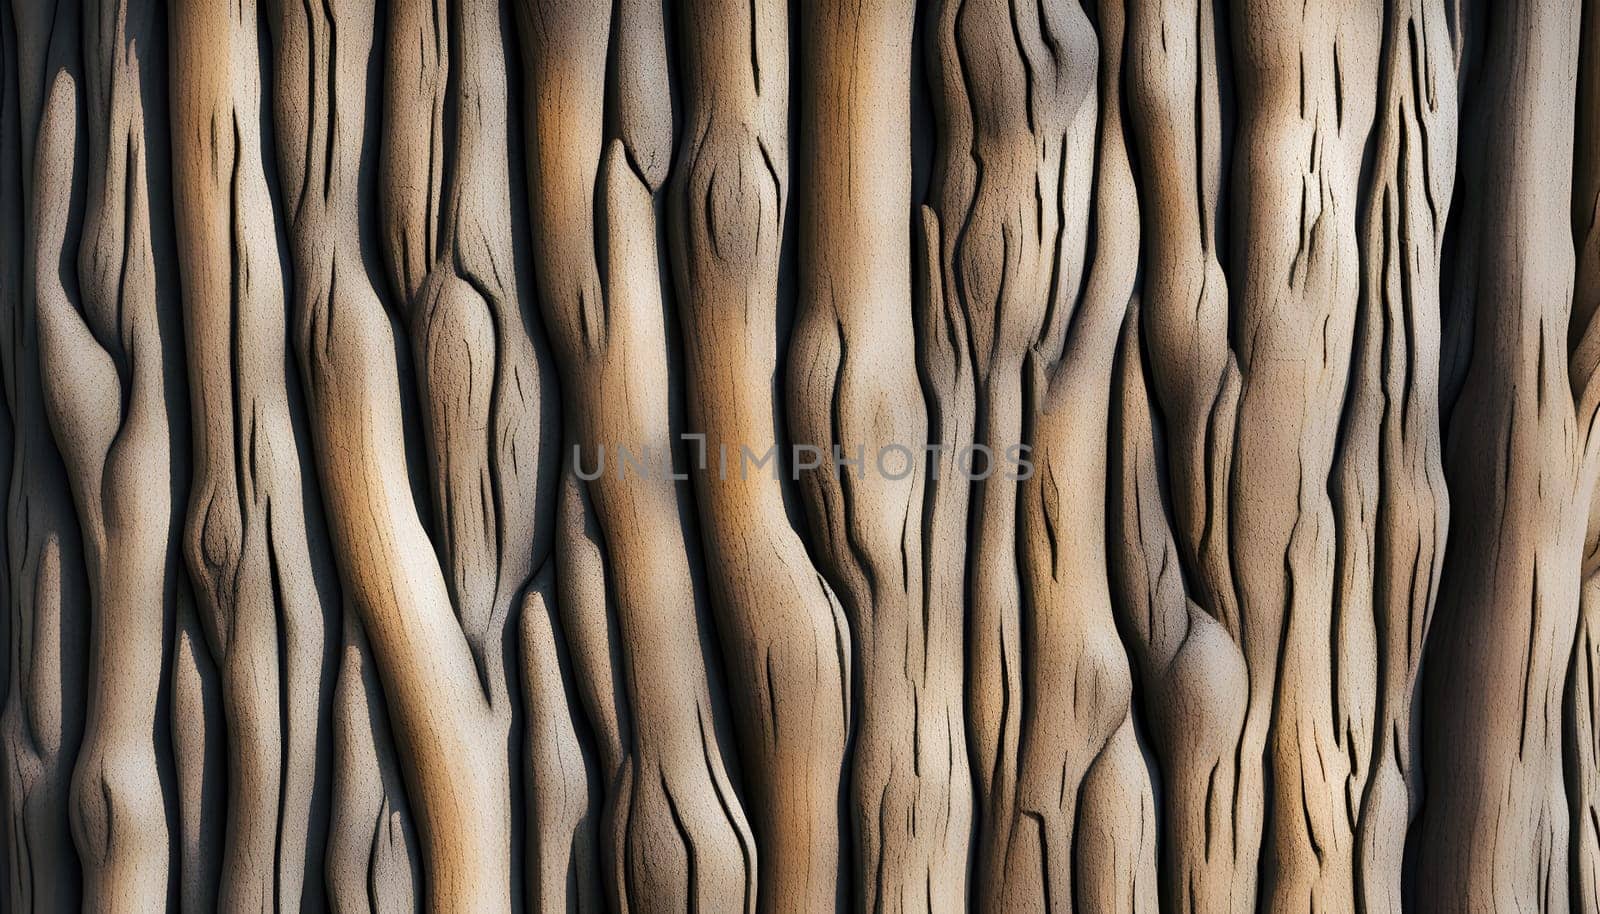 Abstract Wooden Textures and Patterns Created by artificial intelligence